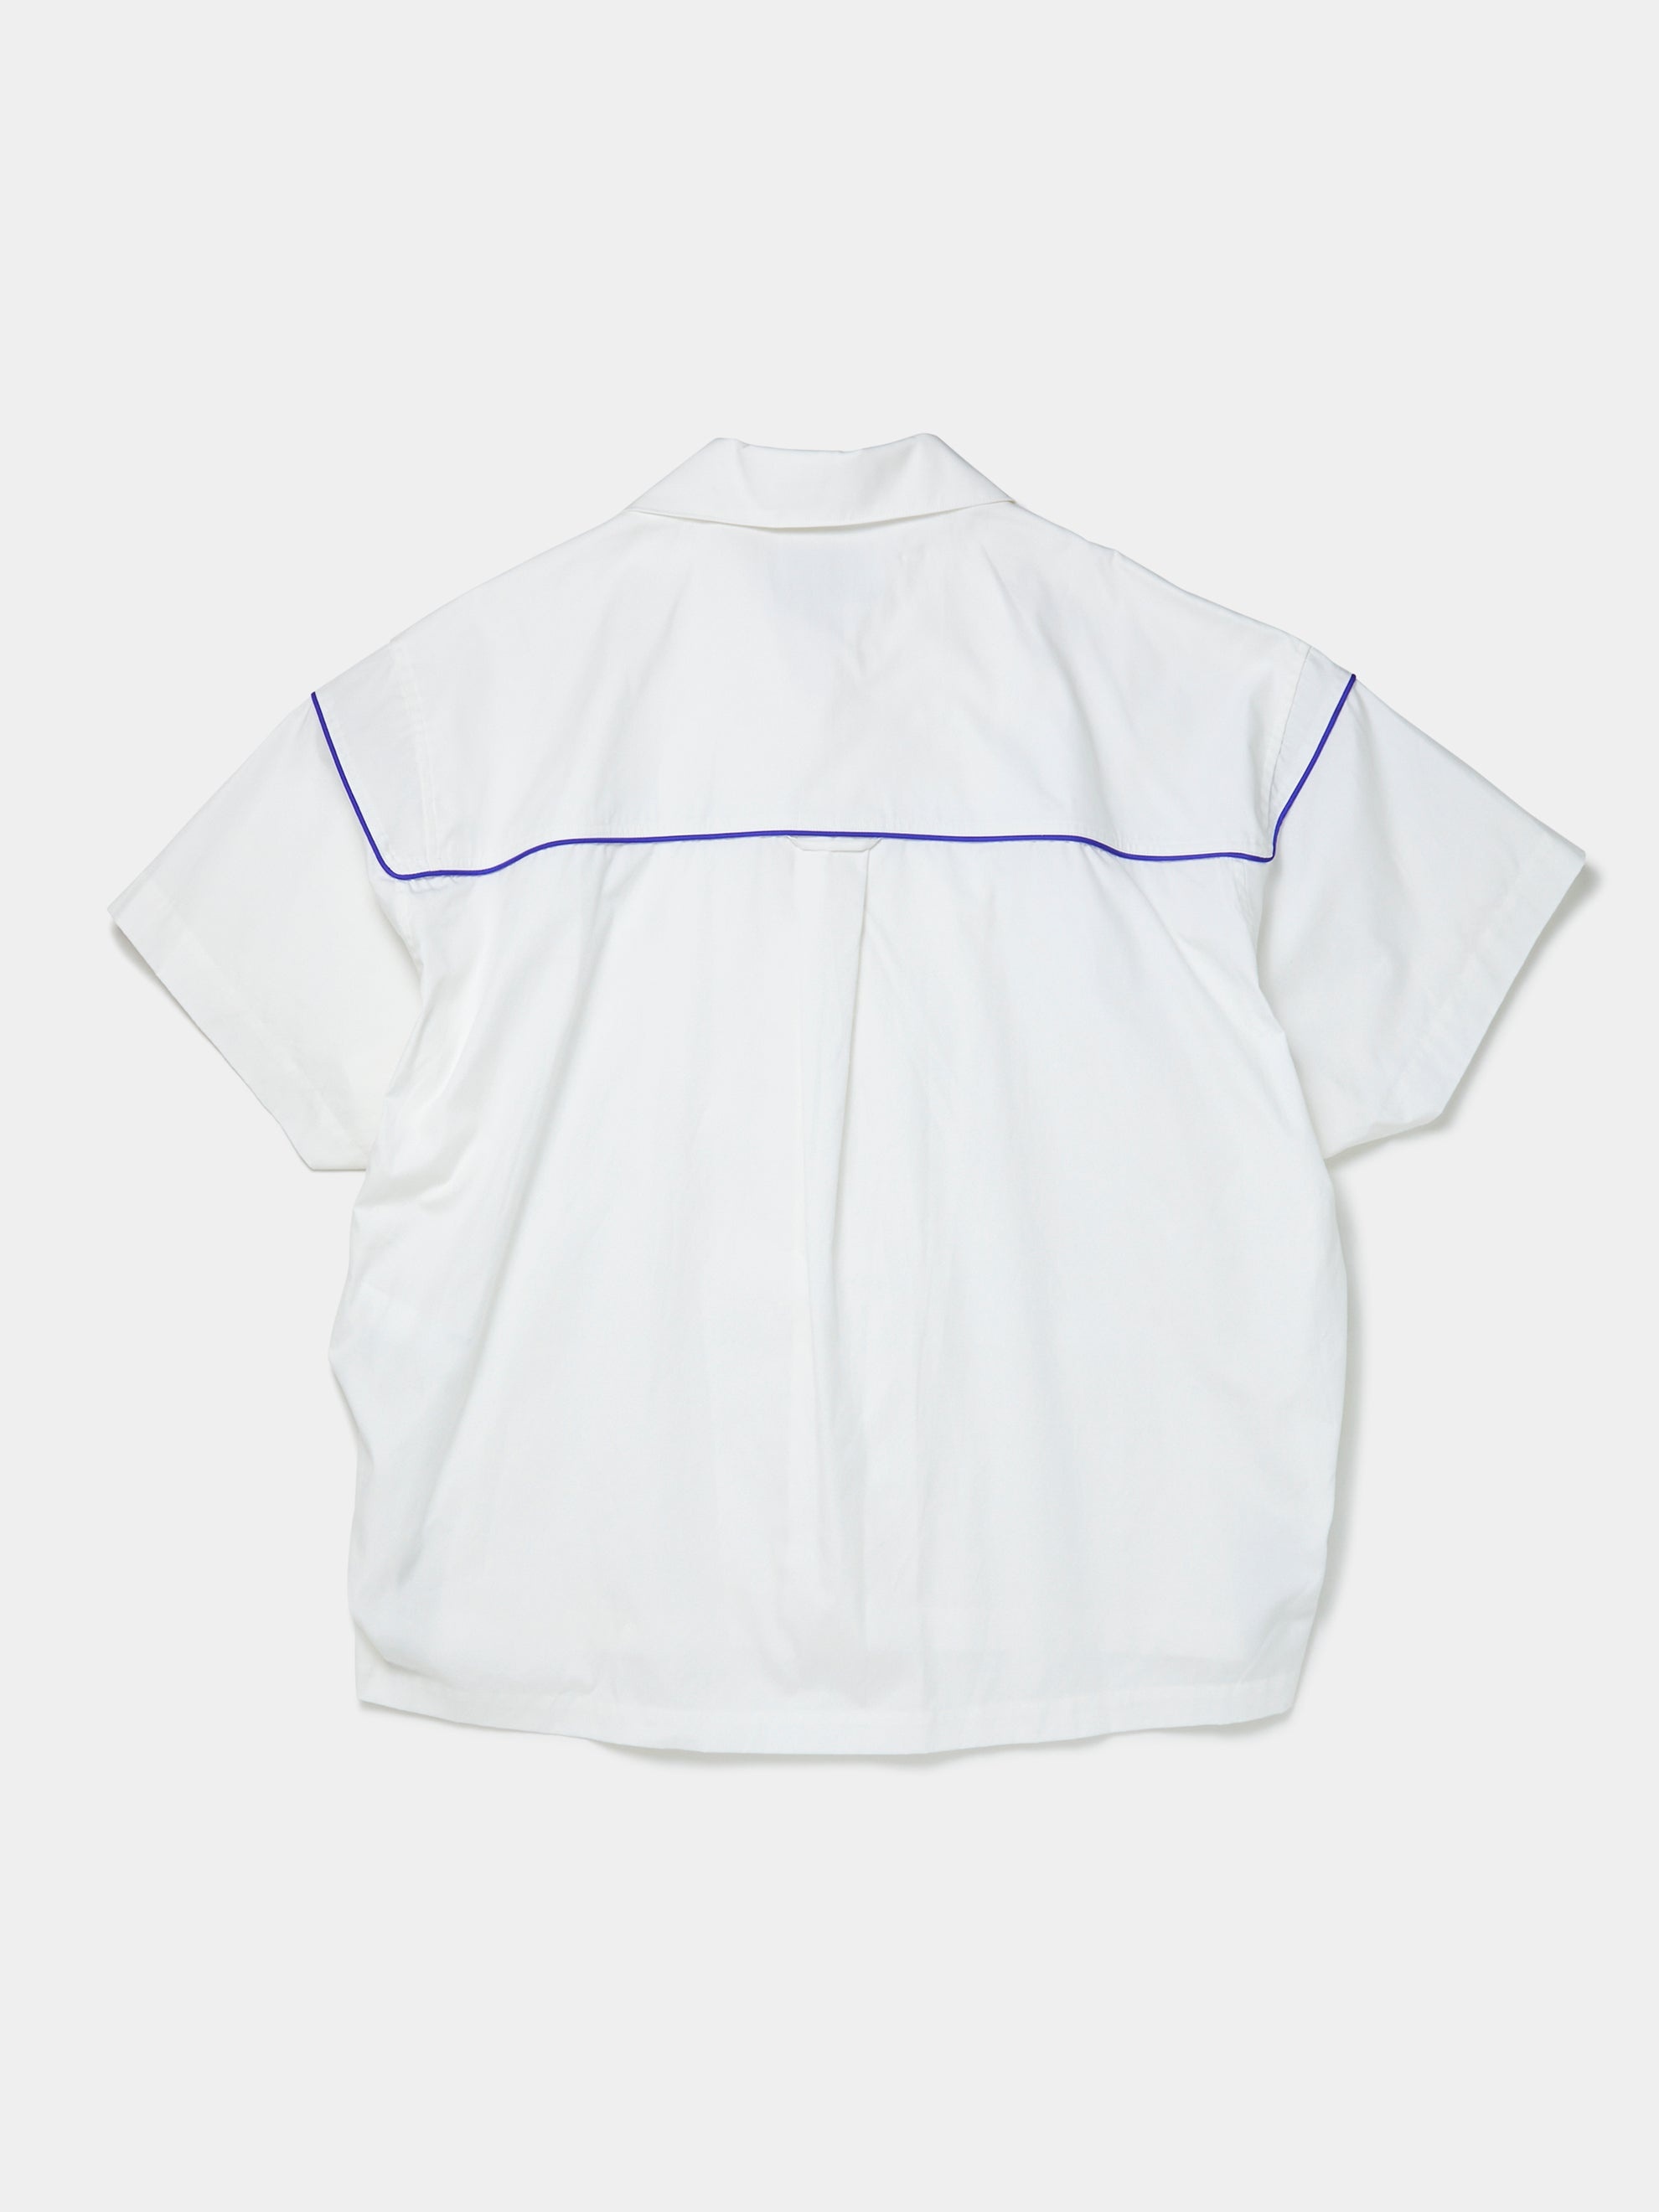 EMBROIDERED BOWLING SHIRT (WHITE) - 6